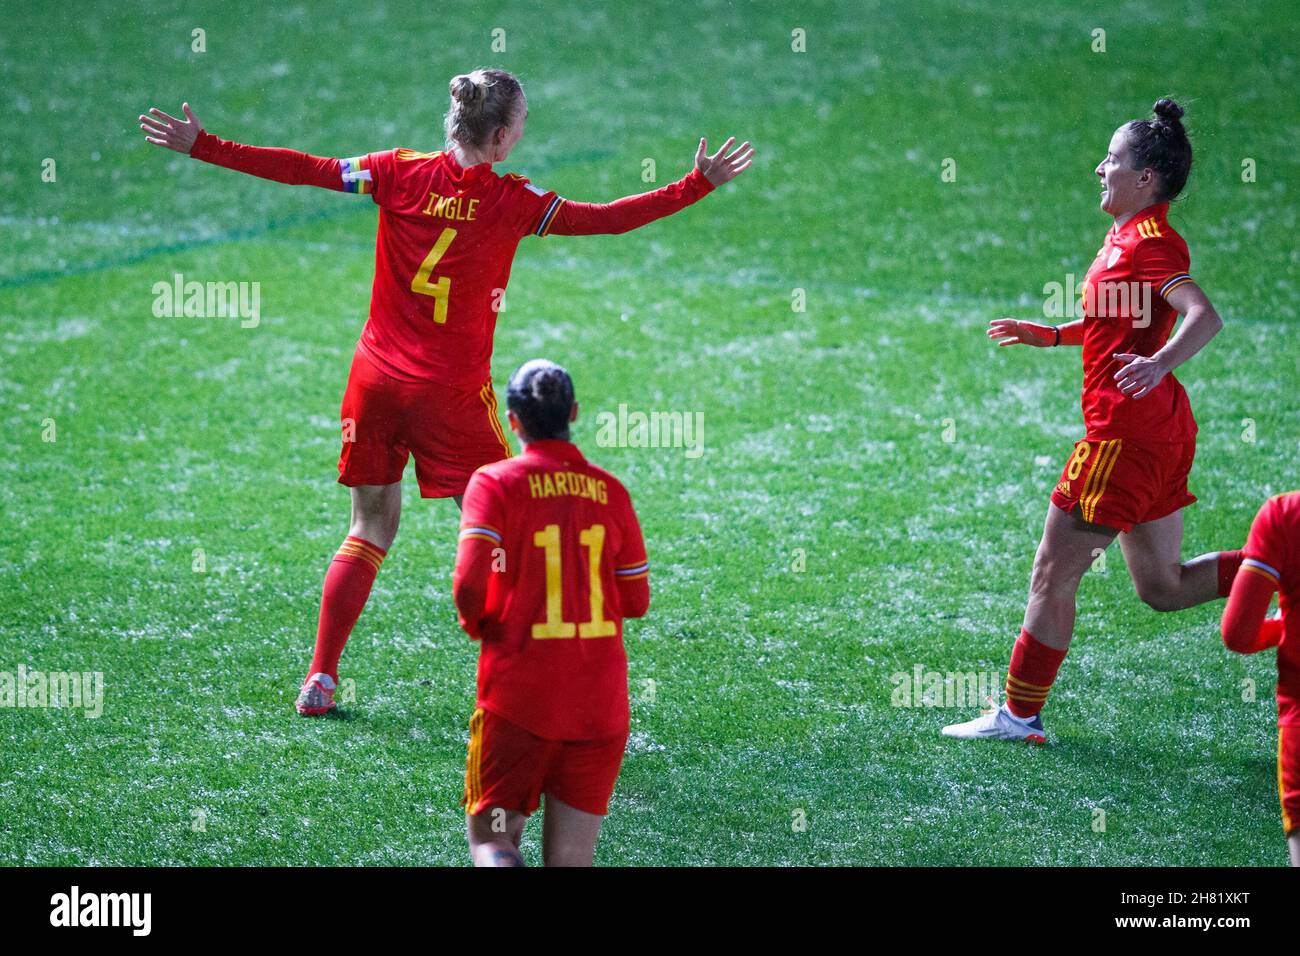 Llanelli, UK. 26 November, 2021. Sophie Ingle of Wales celebrates after scoring a goal during the Wales v Greece Women's World Cup Qualification match. Credit: Gruffydd Thomas/Alamy Stock Photo